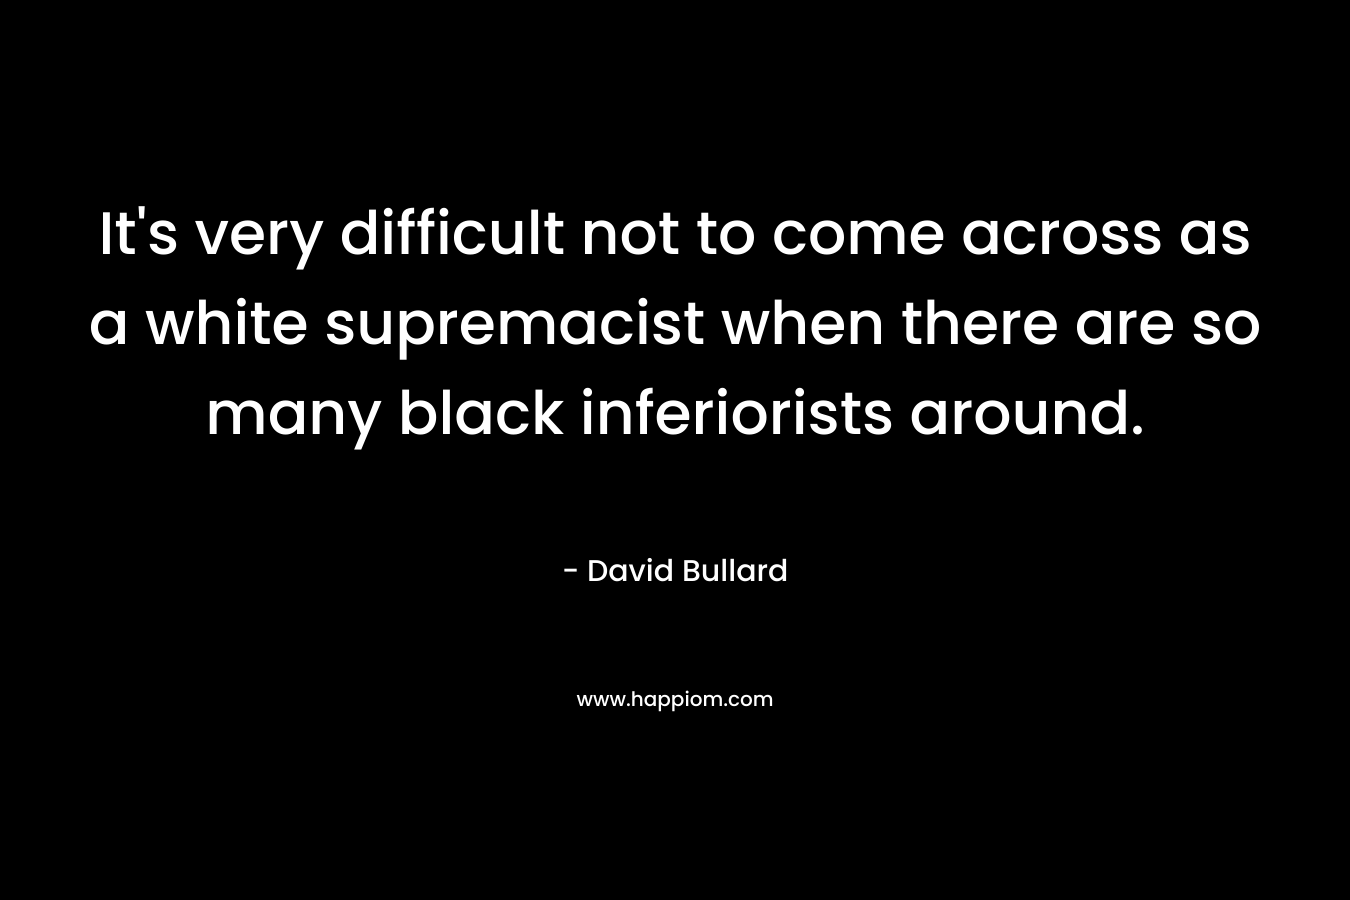 It’s very difficult not to come across as a white supremacist when there are so many black inferiorists around. – David Bullard